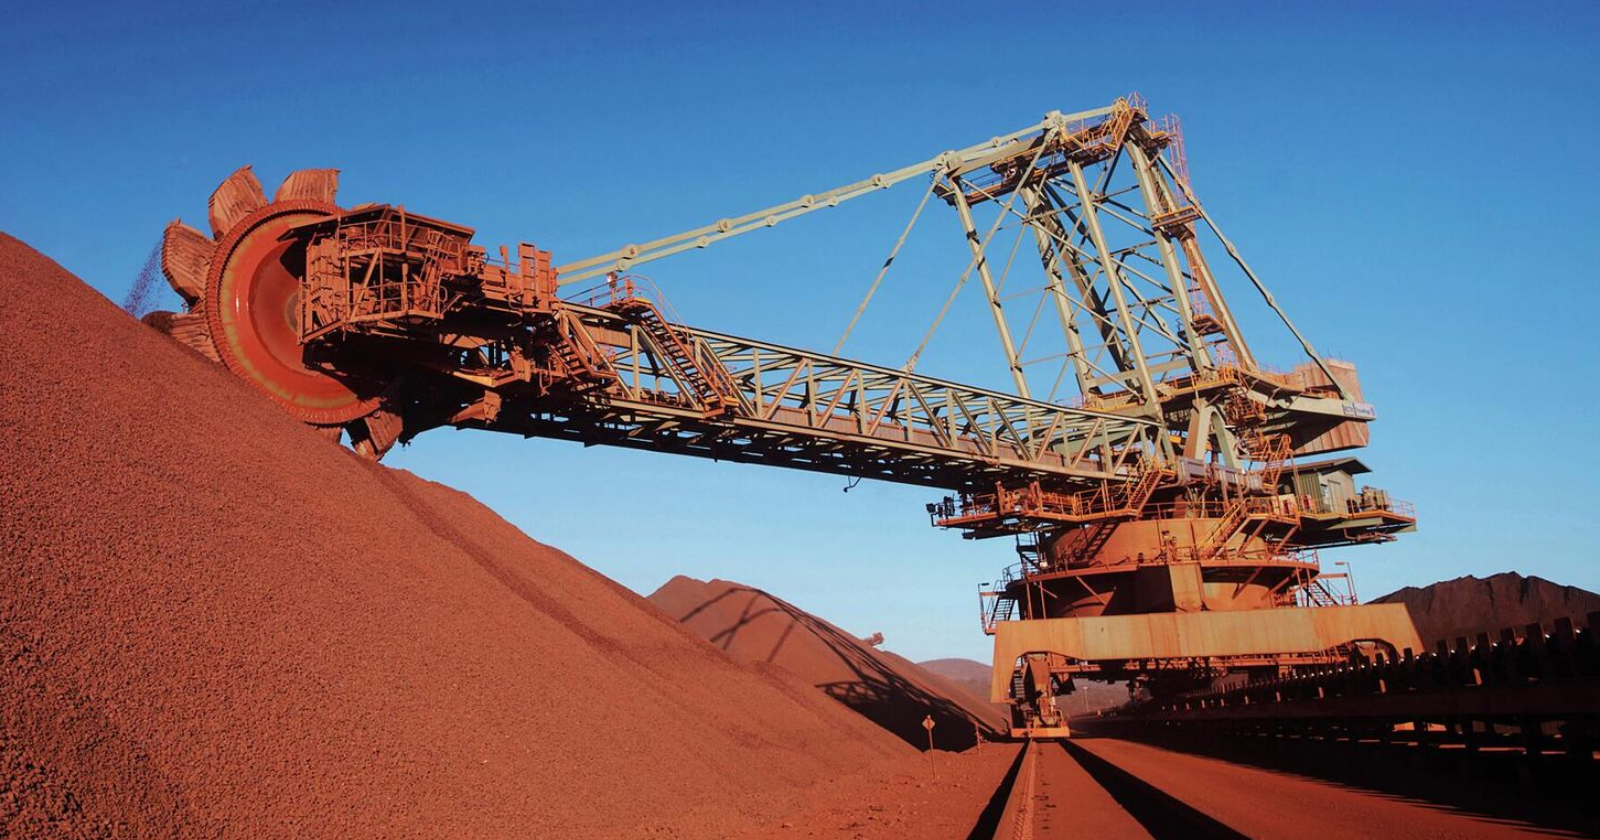 The-Iron-Throne-India-and-China-Clash-in-Western-Australia-s-Iron-Ore-Battle